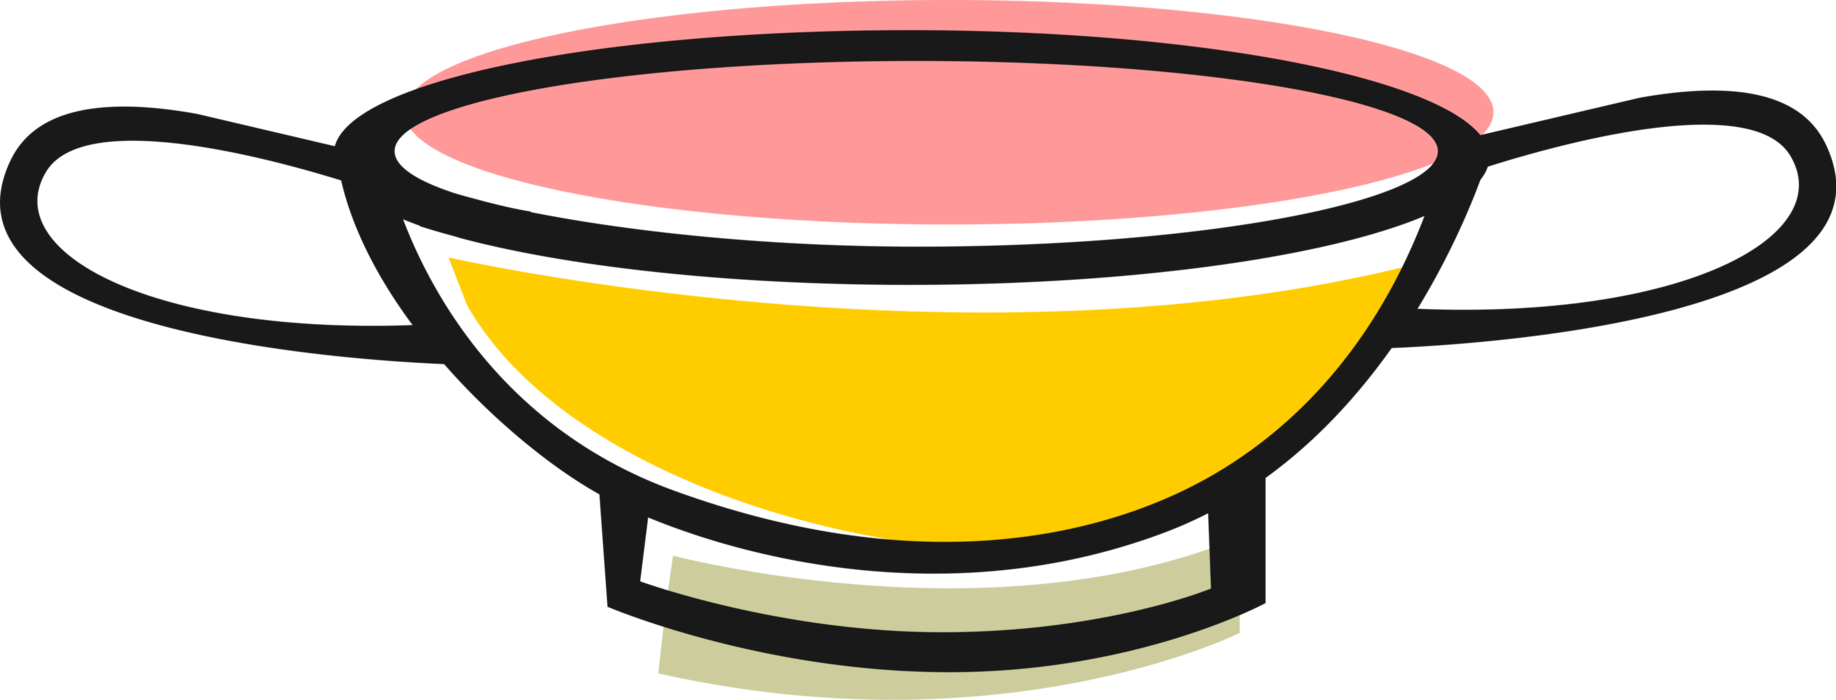 Vector Illustration of Round Bowl Container for Liquids, Food 